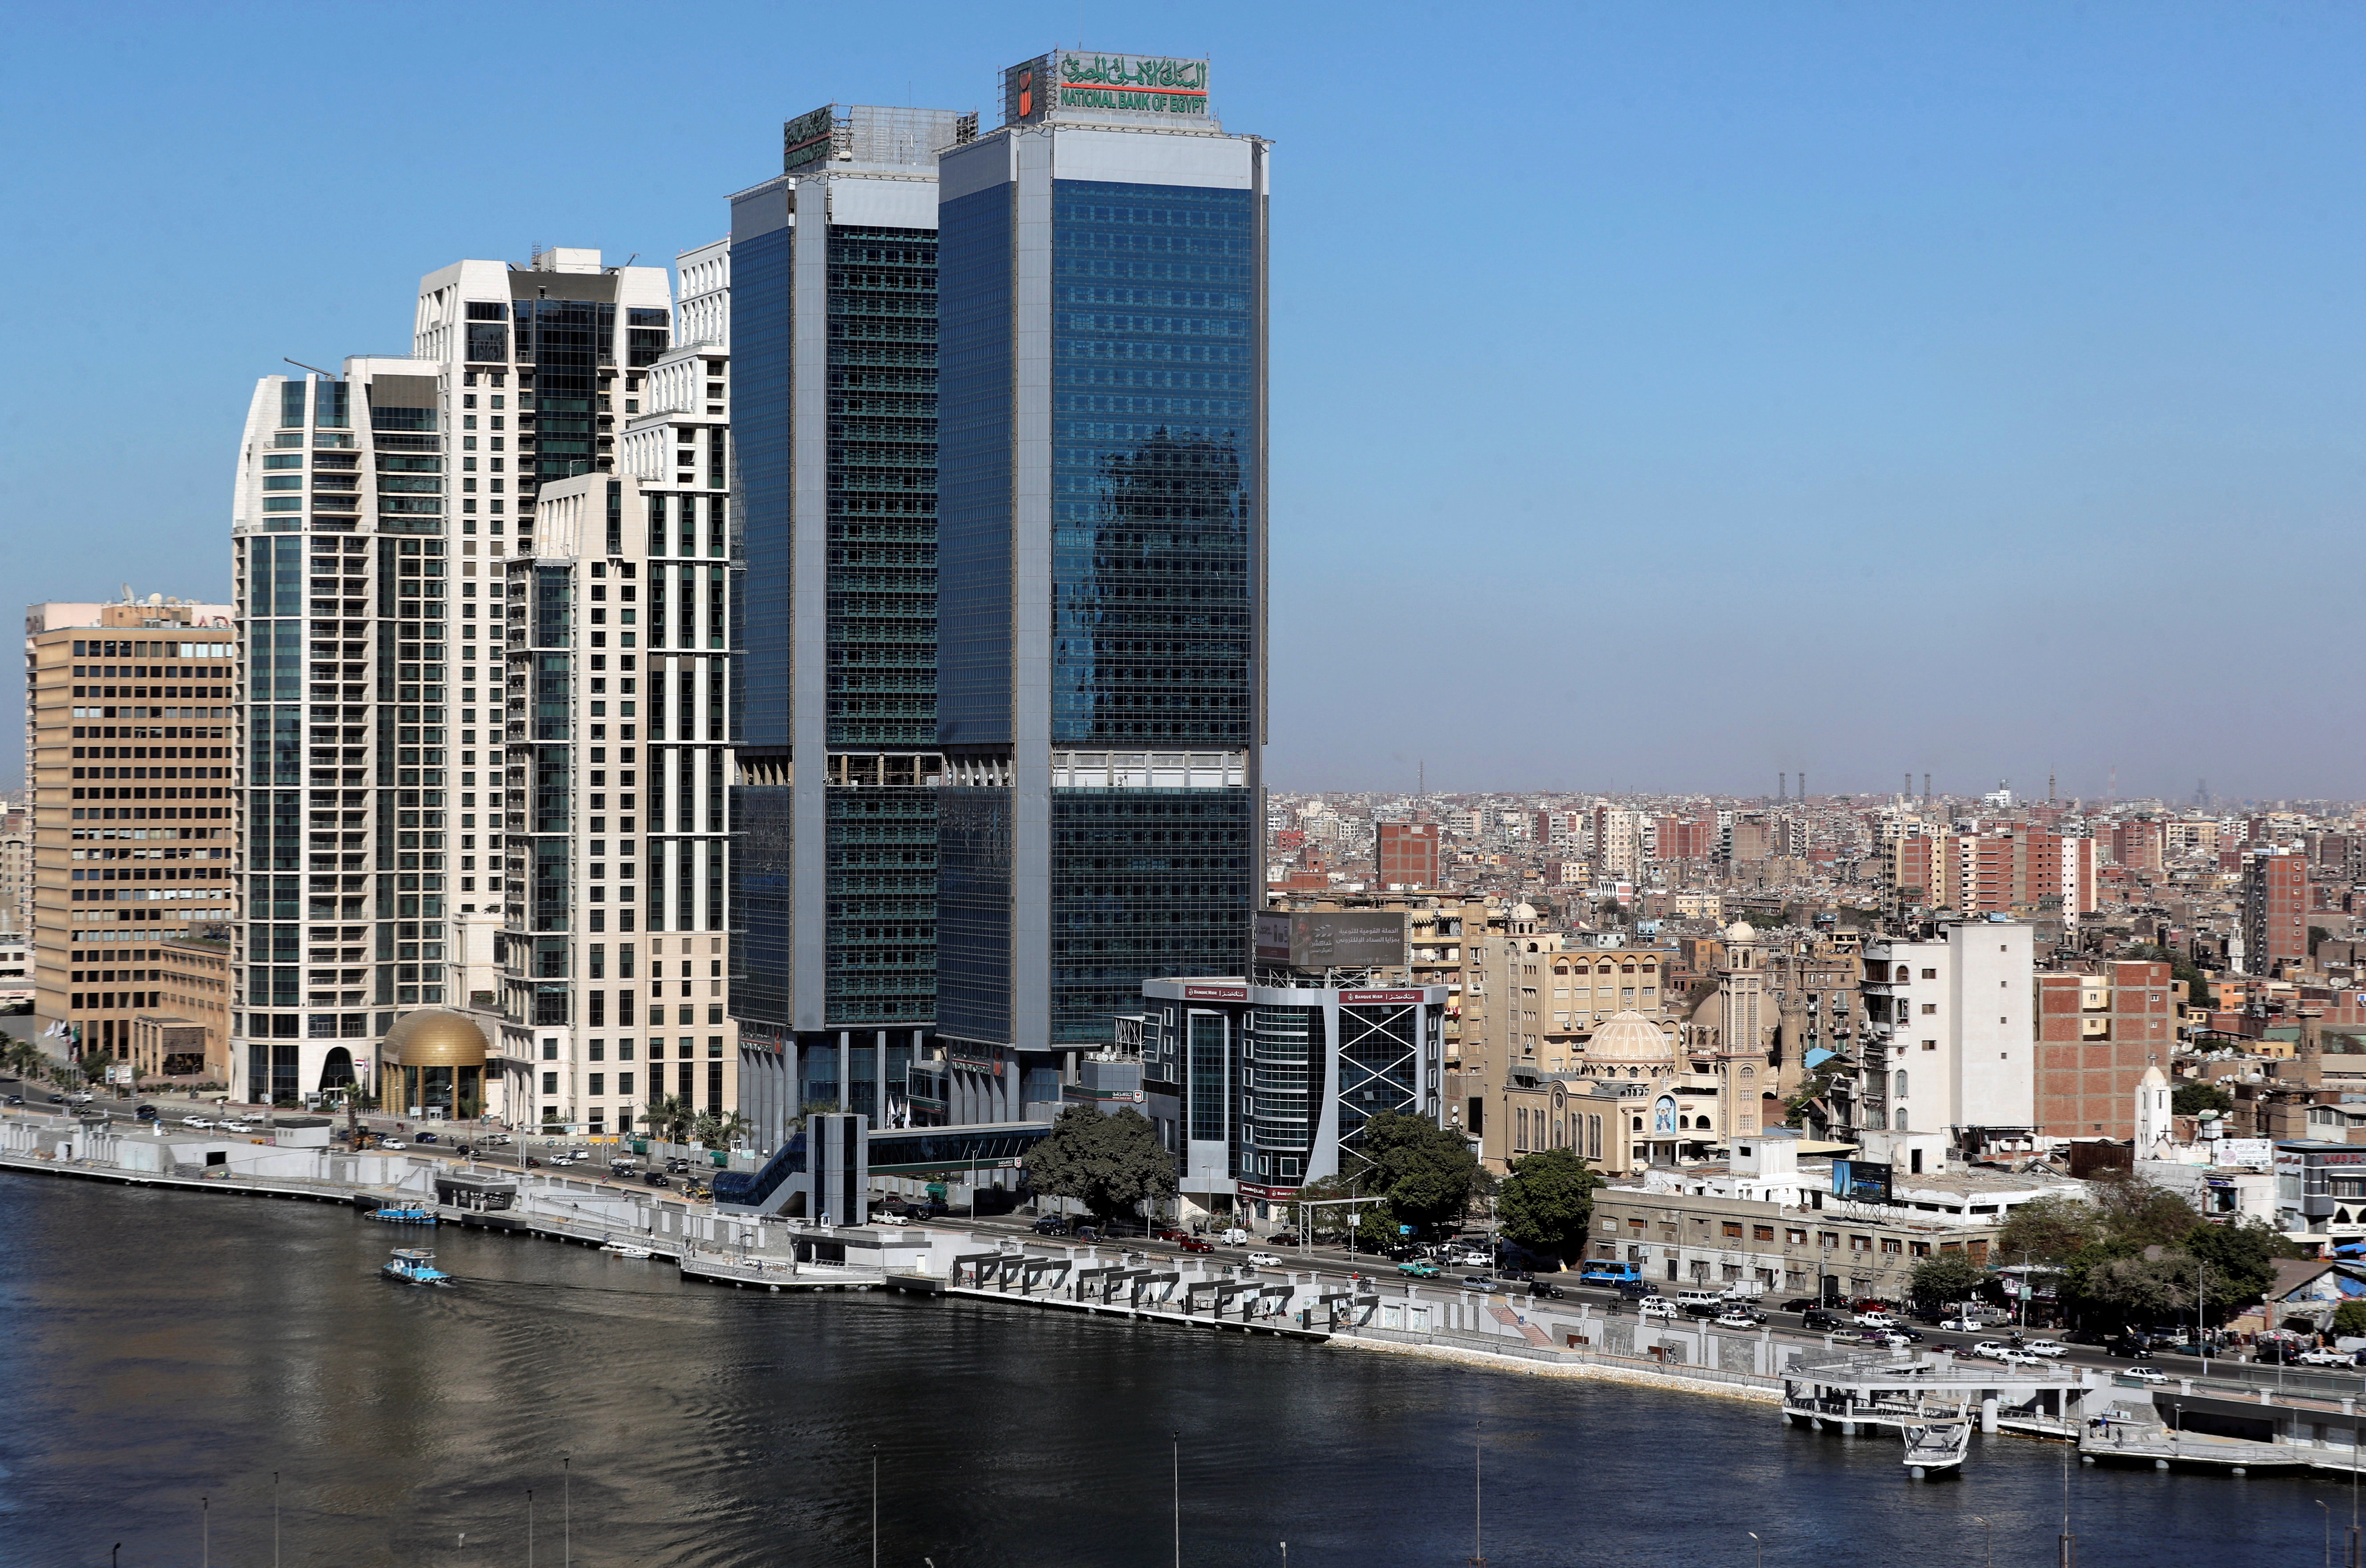 General view of hotels, banks and office buildings by the Nile River in Cairo